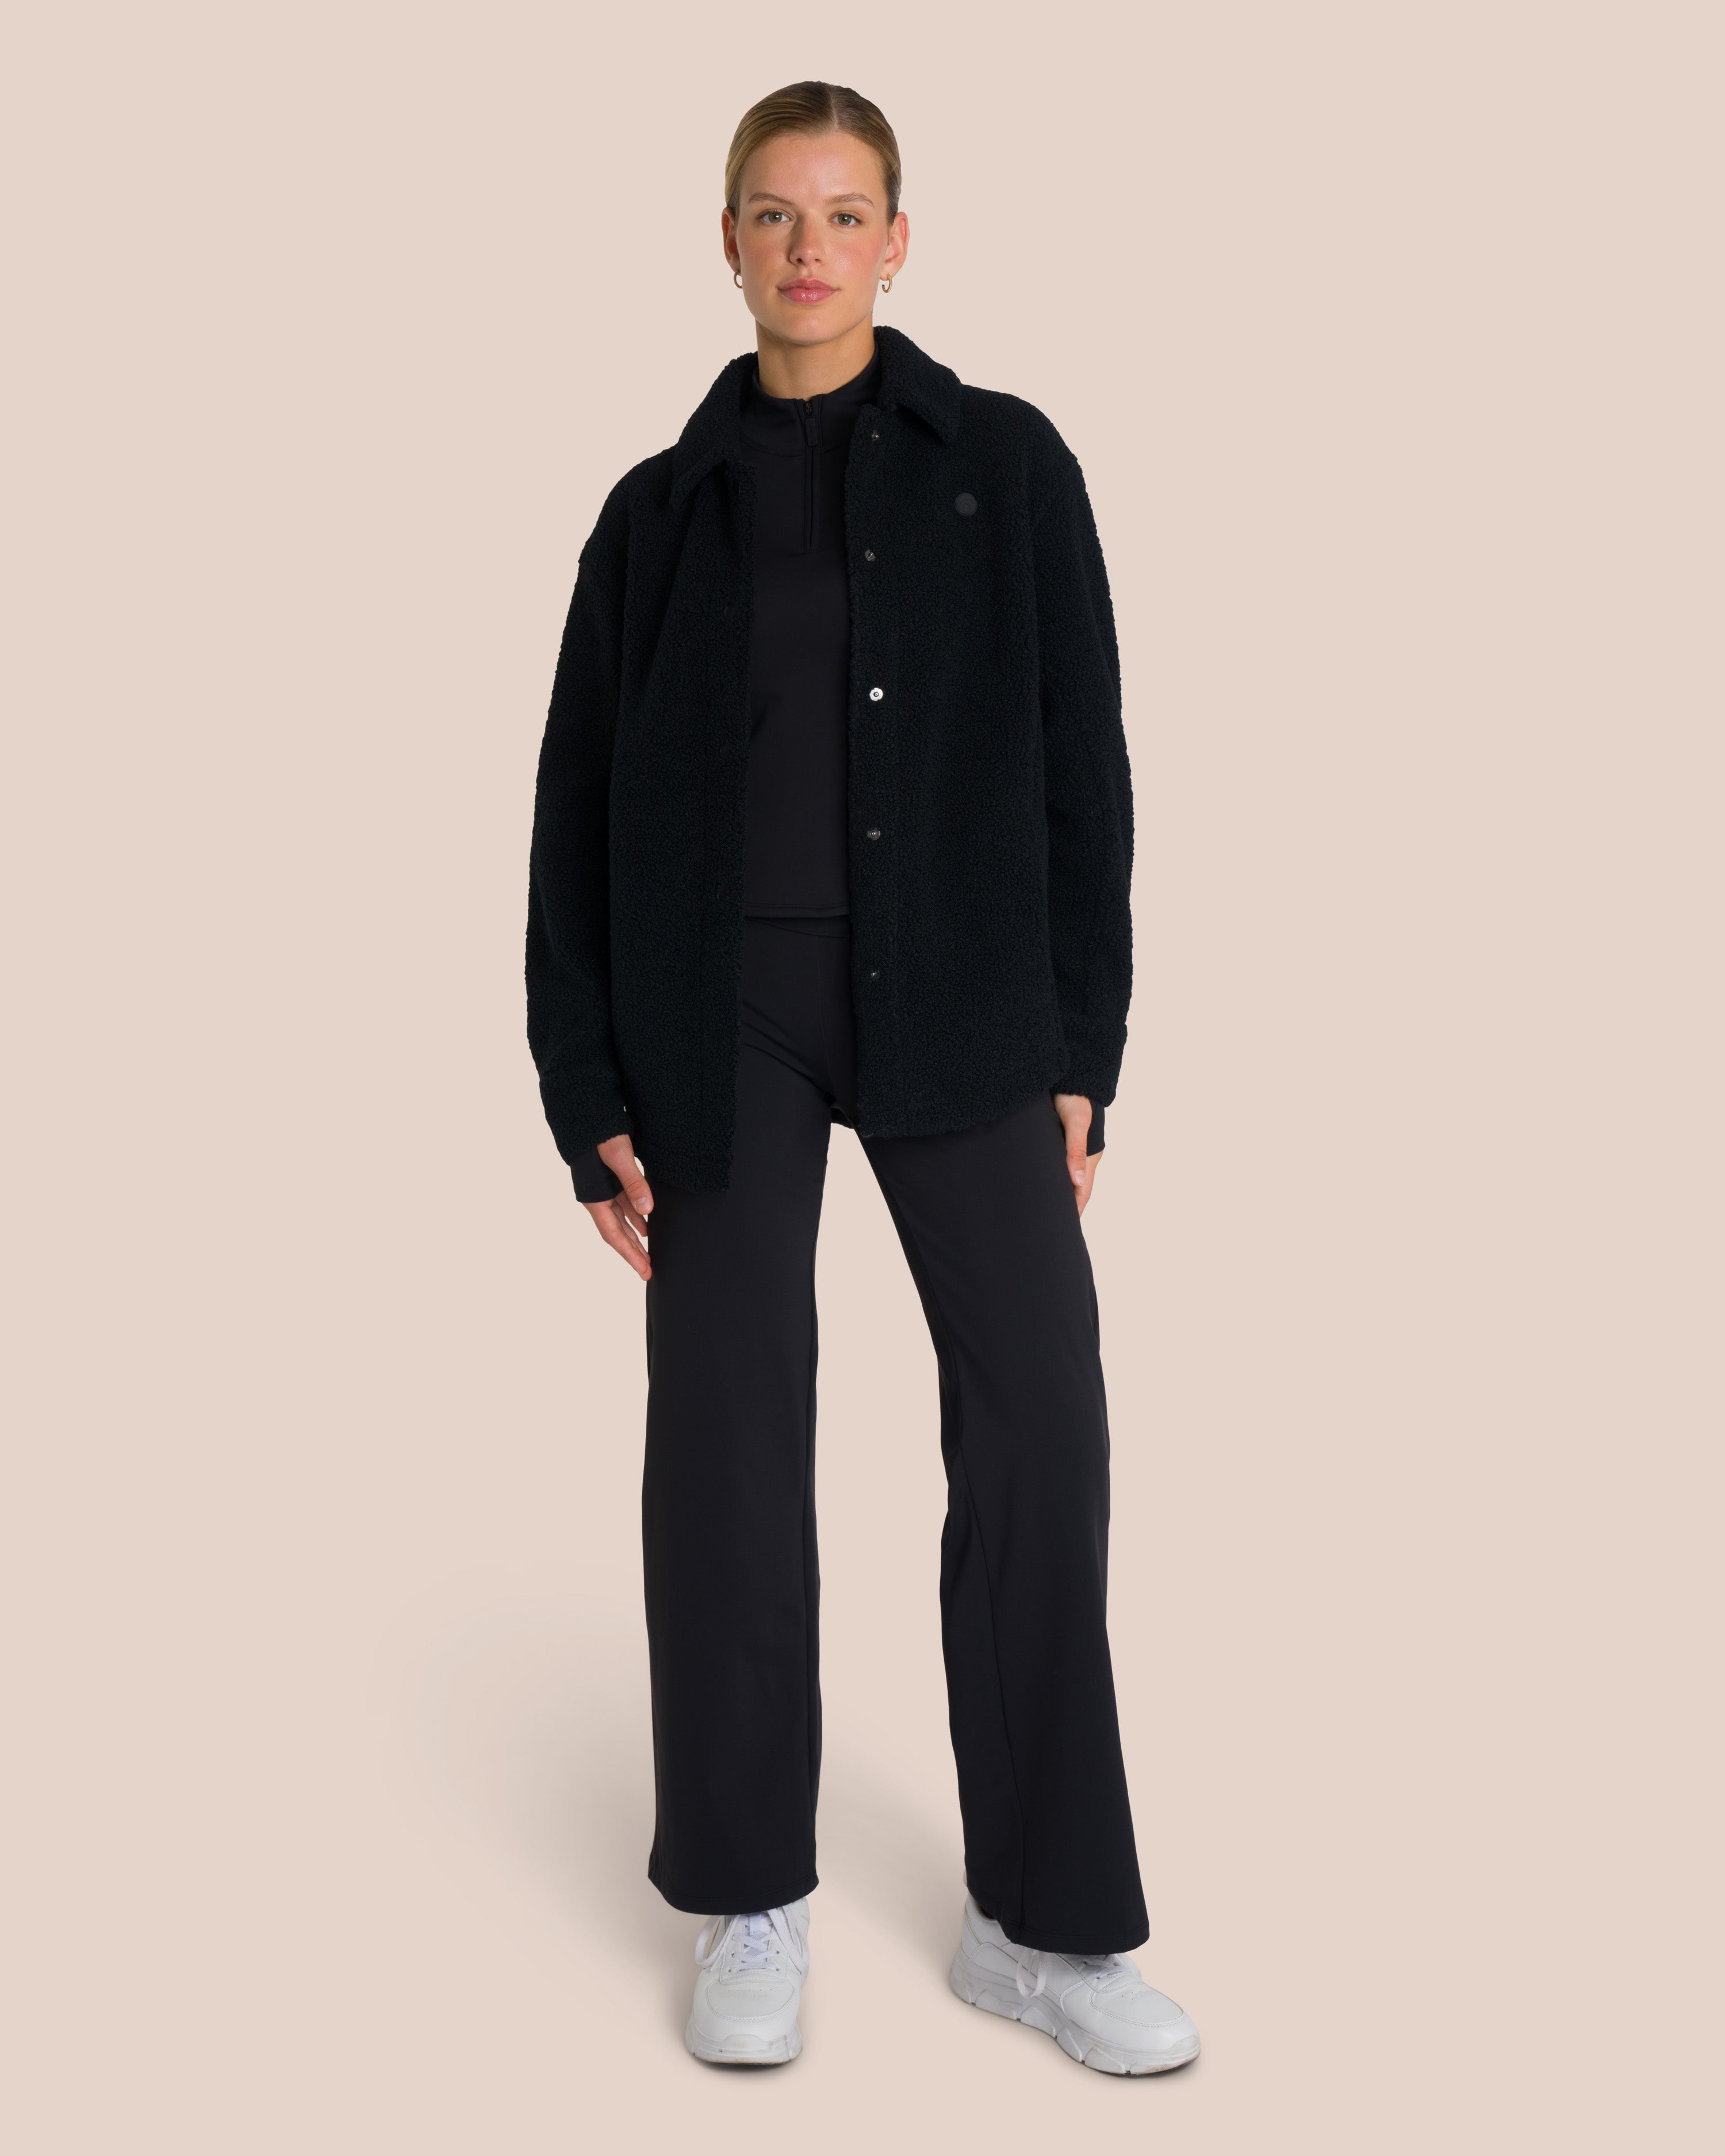 Florence Layer Straight Leg Set Deluxe - Black